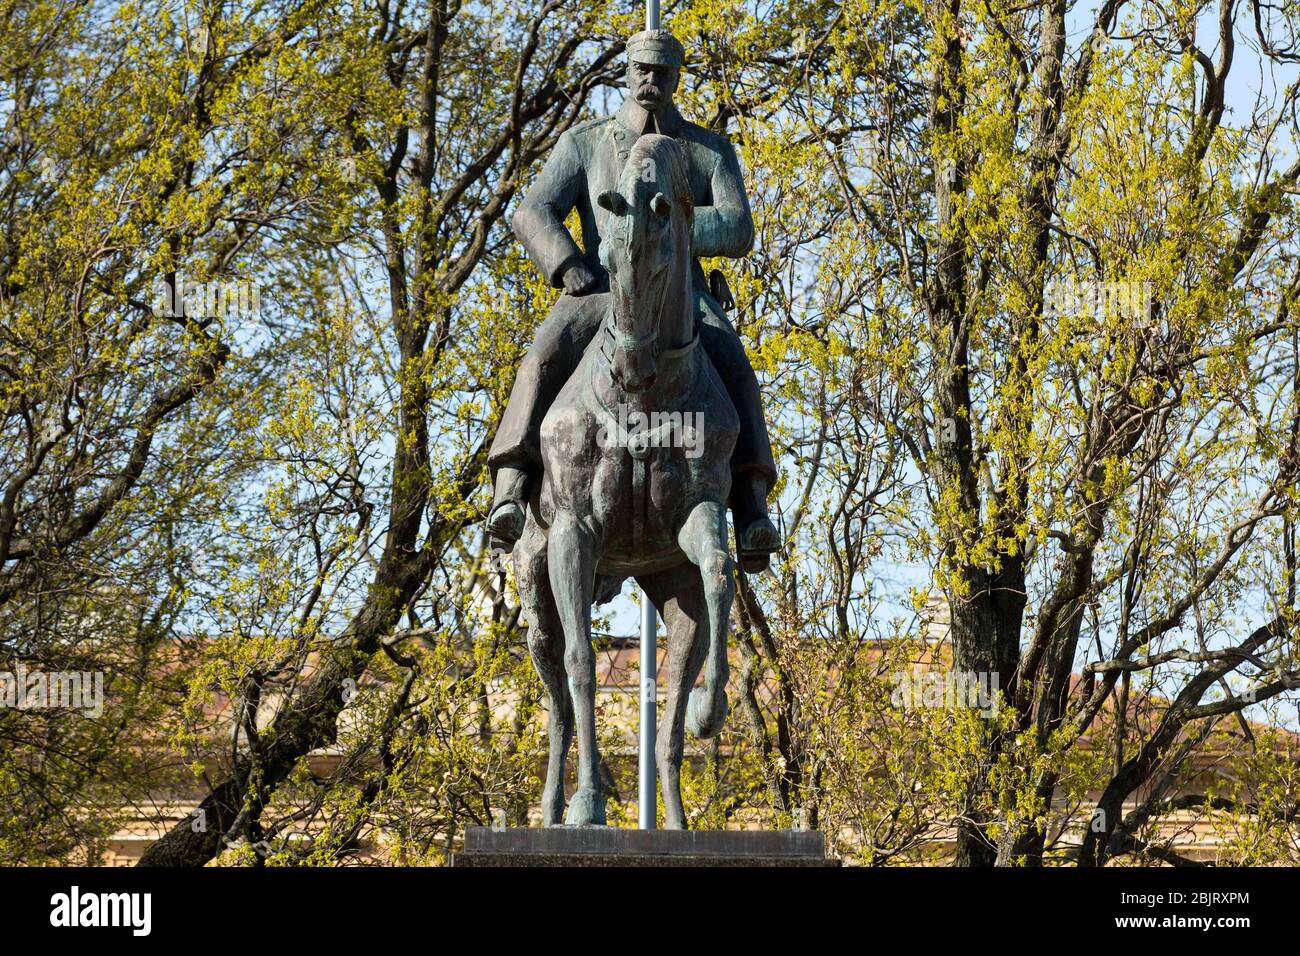 Lublin, Poland. 17th Apr, 2020. View of the Jozef Pilsudski Monument at the Plac Litewski (Litewski Square) during the Coronavirus (COVID-19) lockdown crisis.Due to coronavirus restrictions on movement, bars and restaurants are closed and the streets of Polish cities are depopulated. Credit: Karol Serewis/SOPA Images/ZUMA Wire/Alamy Live News Stock Photo